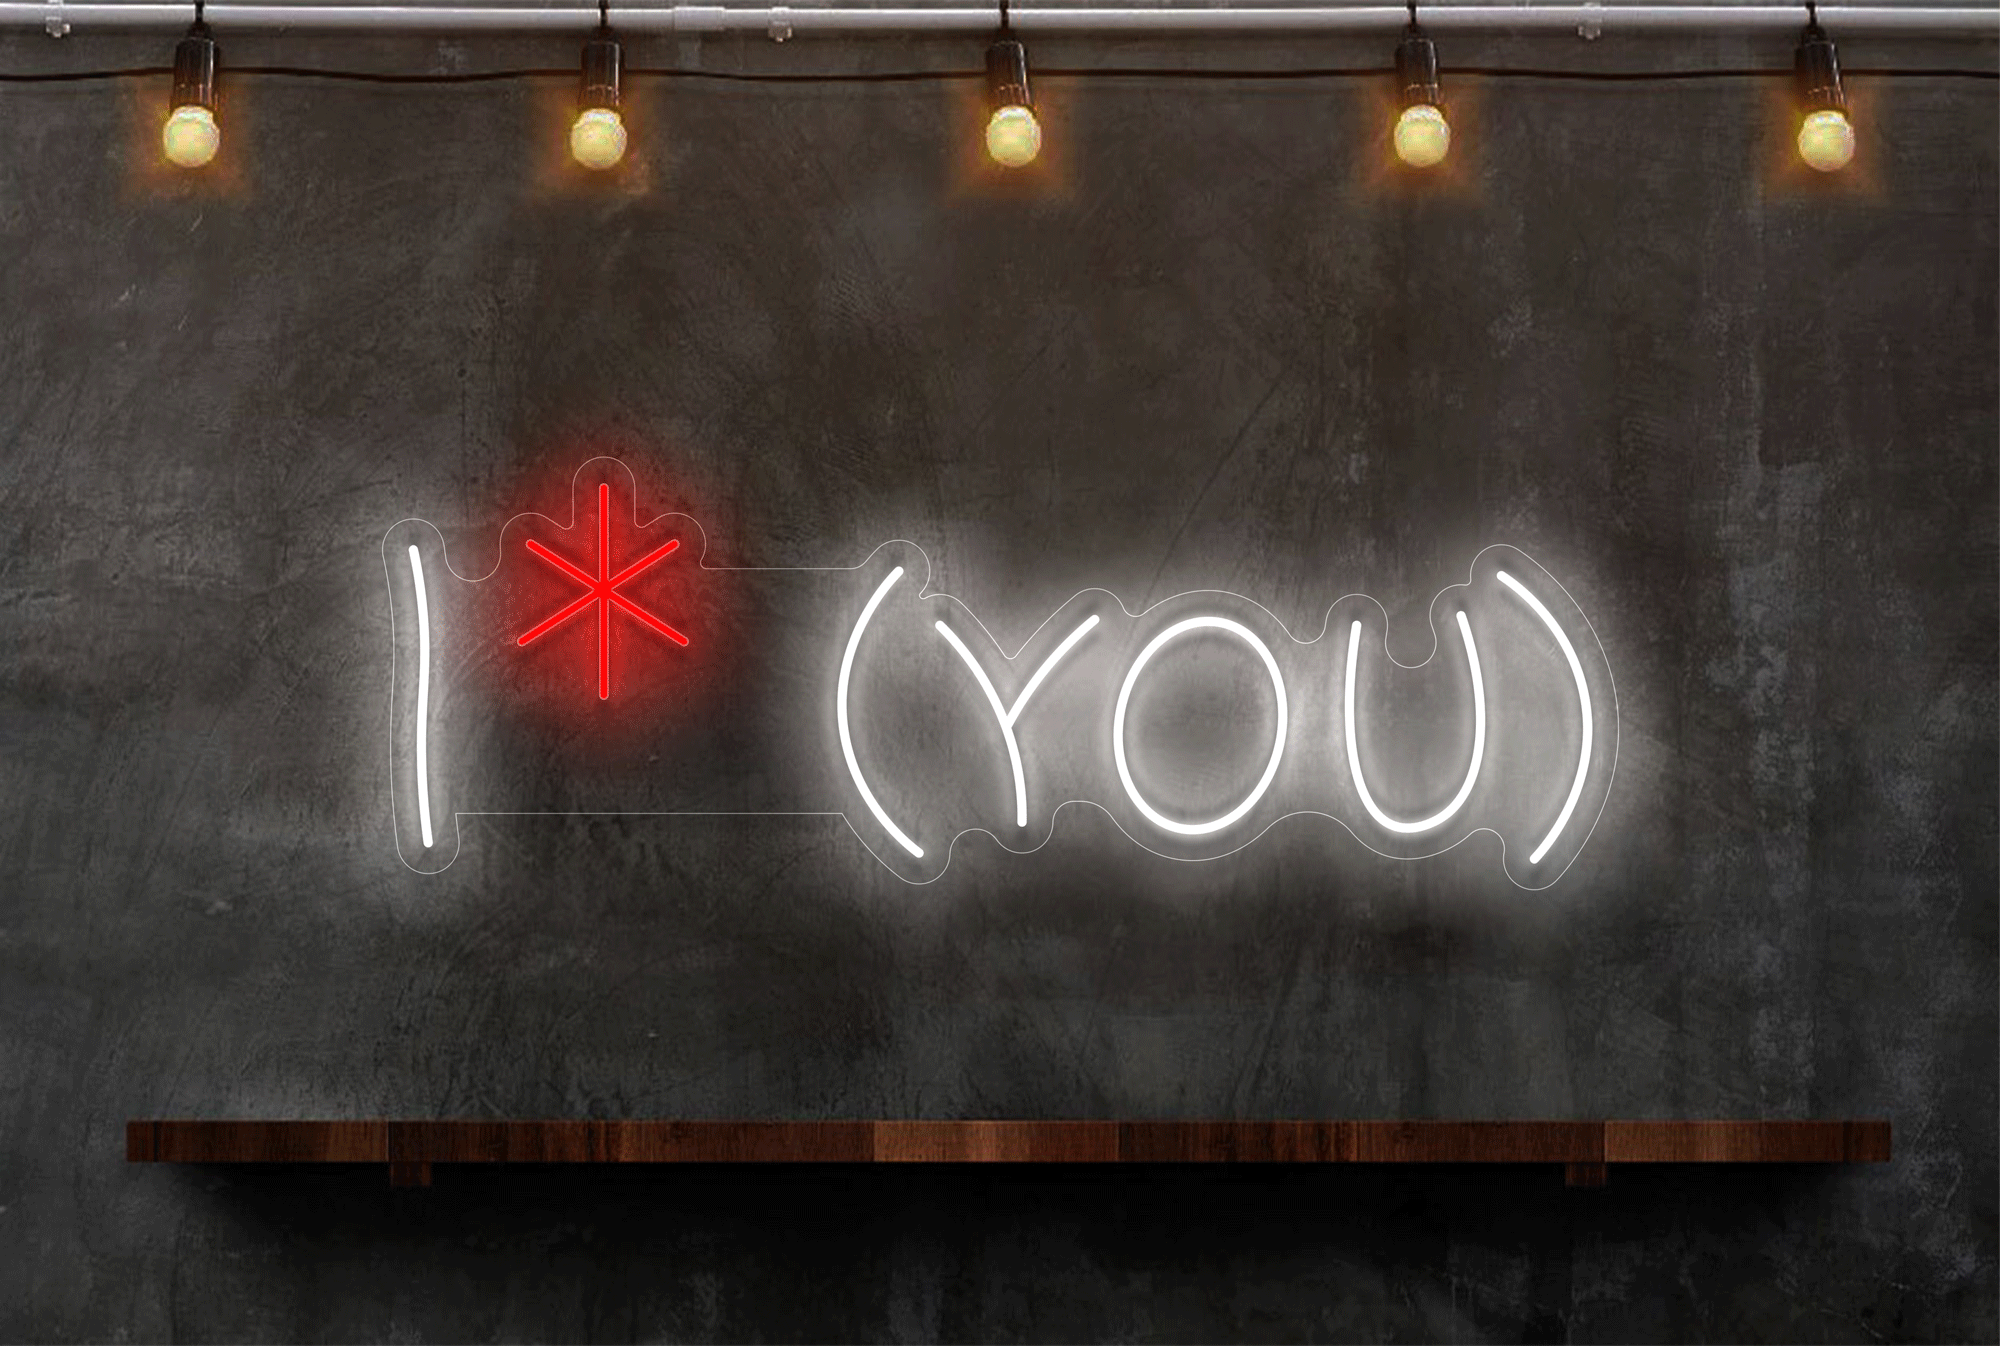 "I * YOU" LED Neon Sign